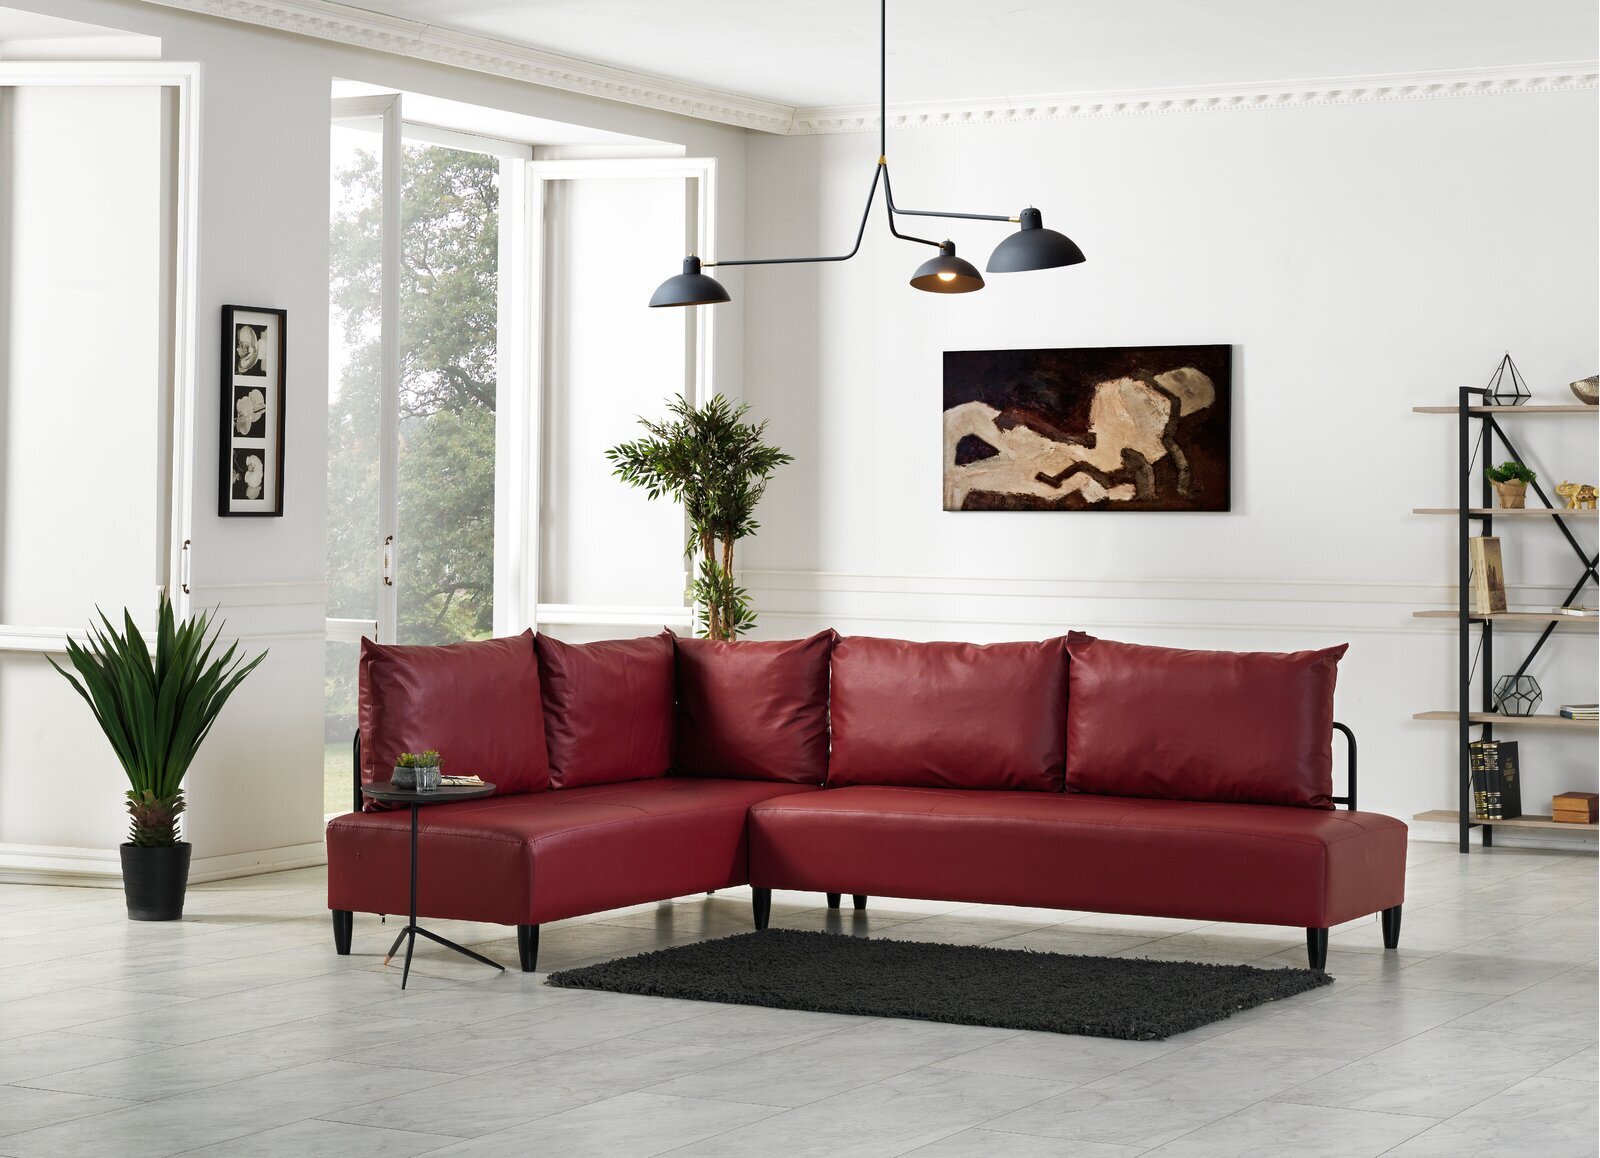 Reverse Modular Armless Leather Sectional